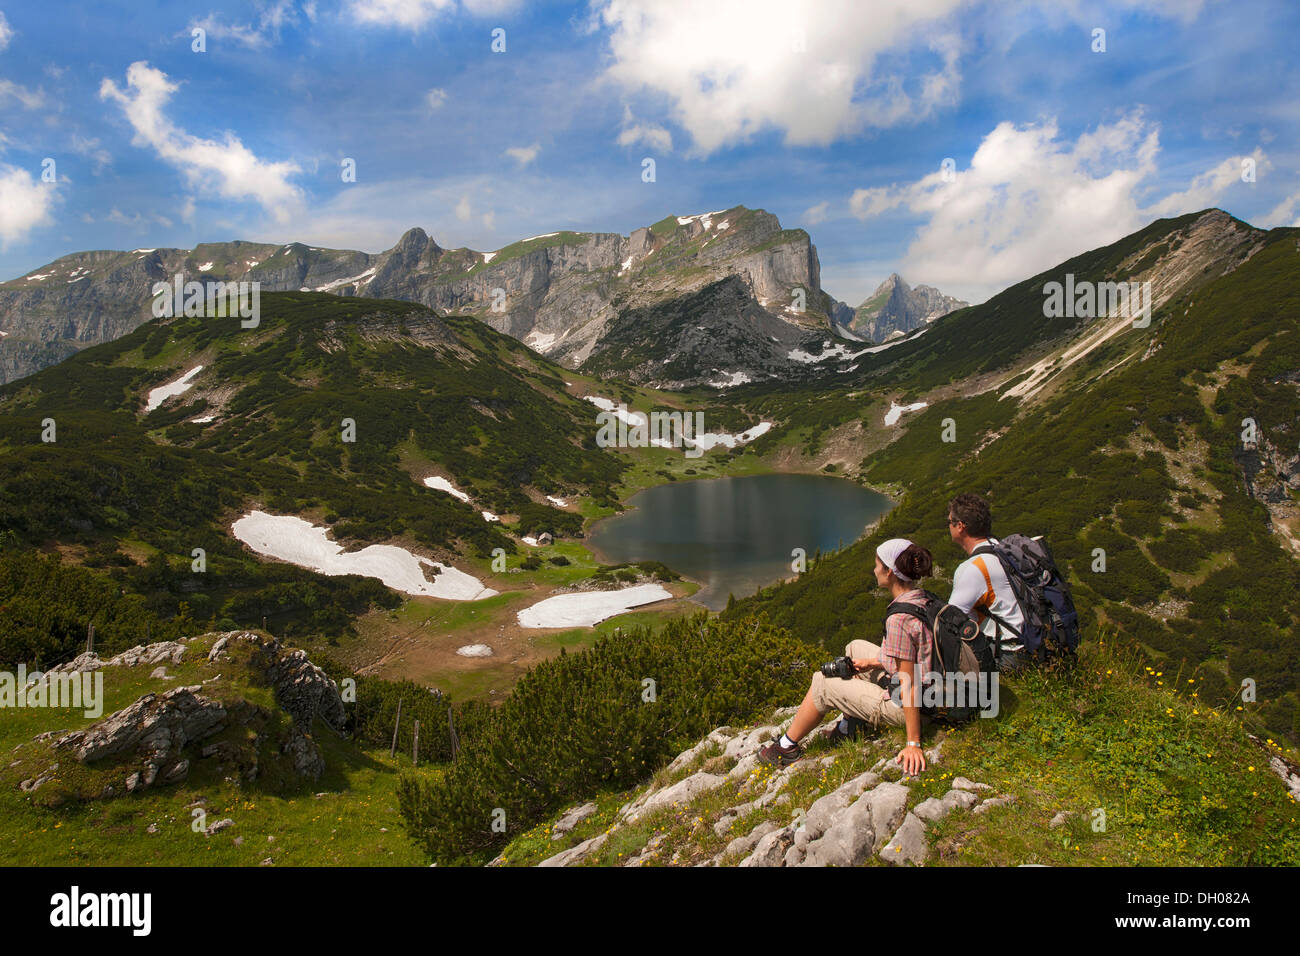 Hikers in the Rofan Mountains, Tyrol, Austria, Europe Stock Photo